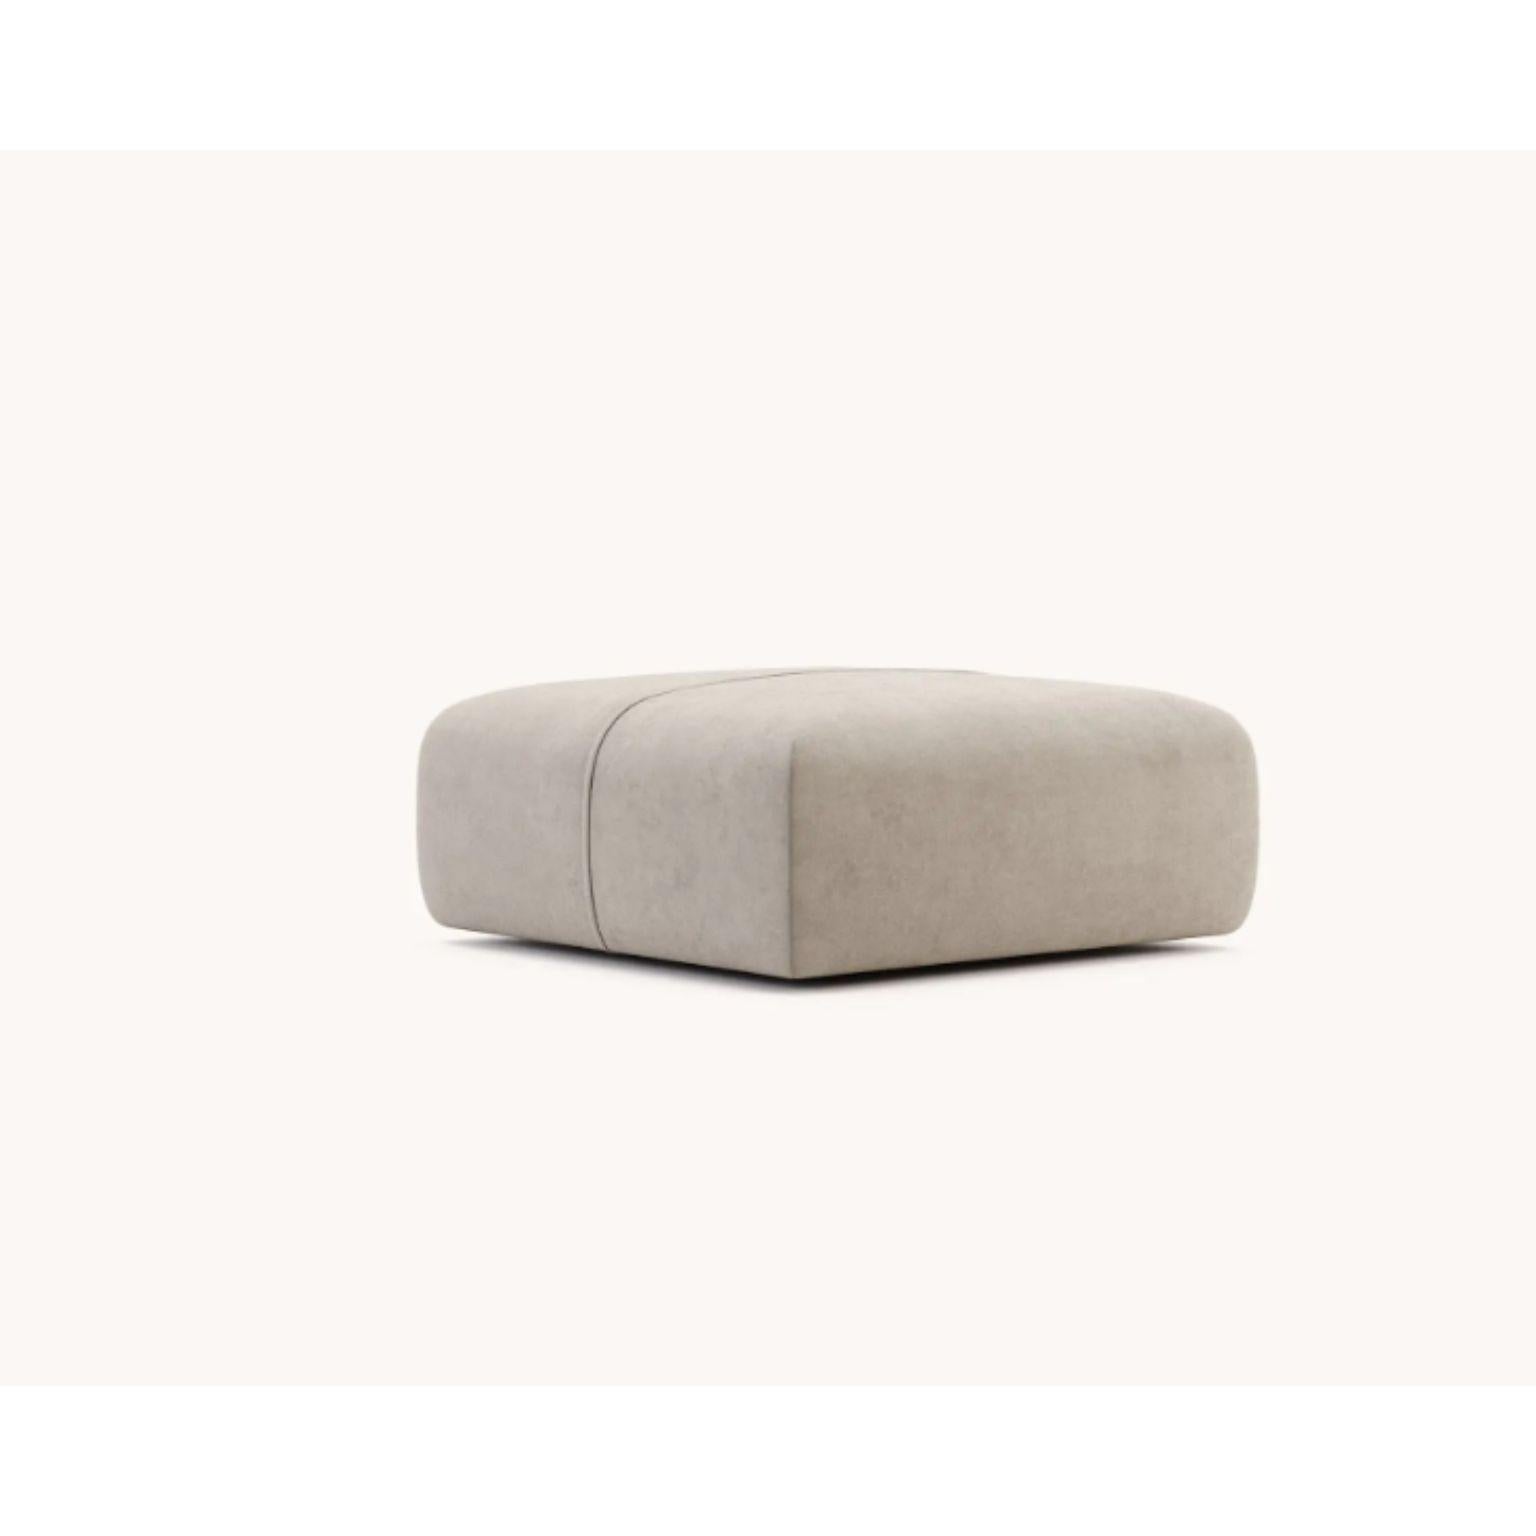 Disruption module pouf by Domkapa
Materials: velvet (Aldan 2928). 
Dimensions: W 100 x D 100 x H 40 cm.
Also available in different materials. 

Disruption is a modular sofa, fully upholstered, with minimalistic design and ergonomic